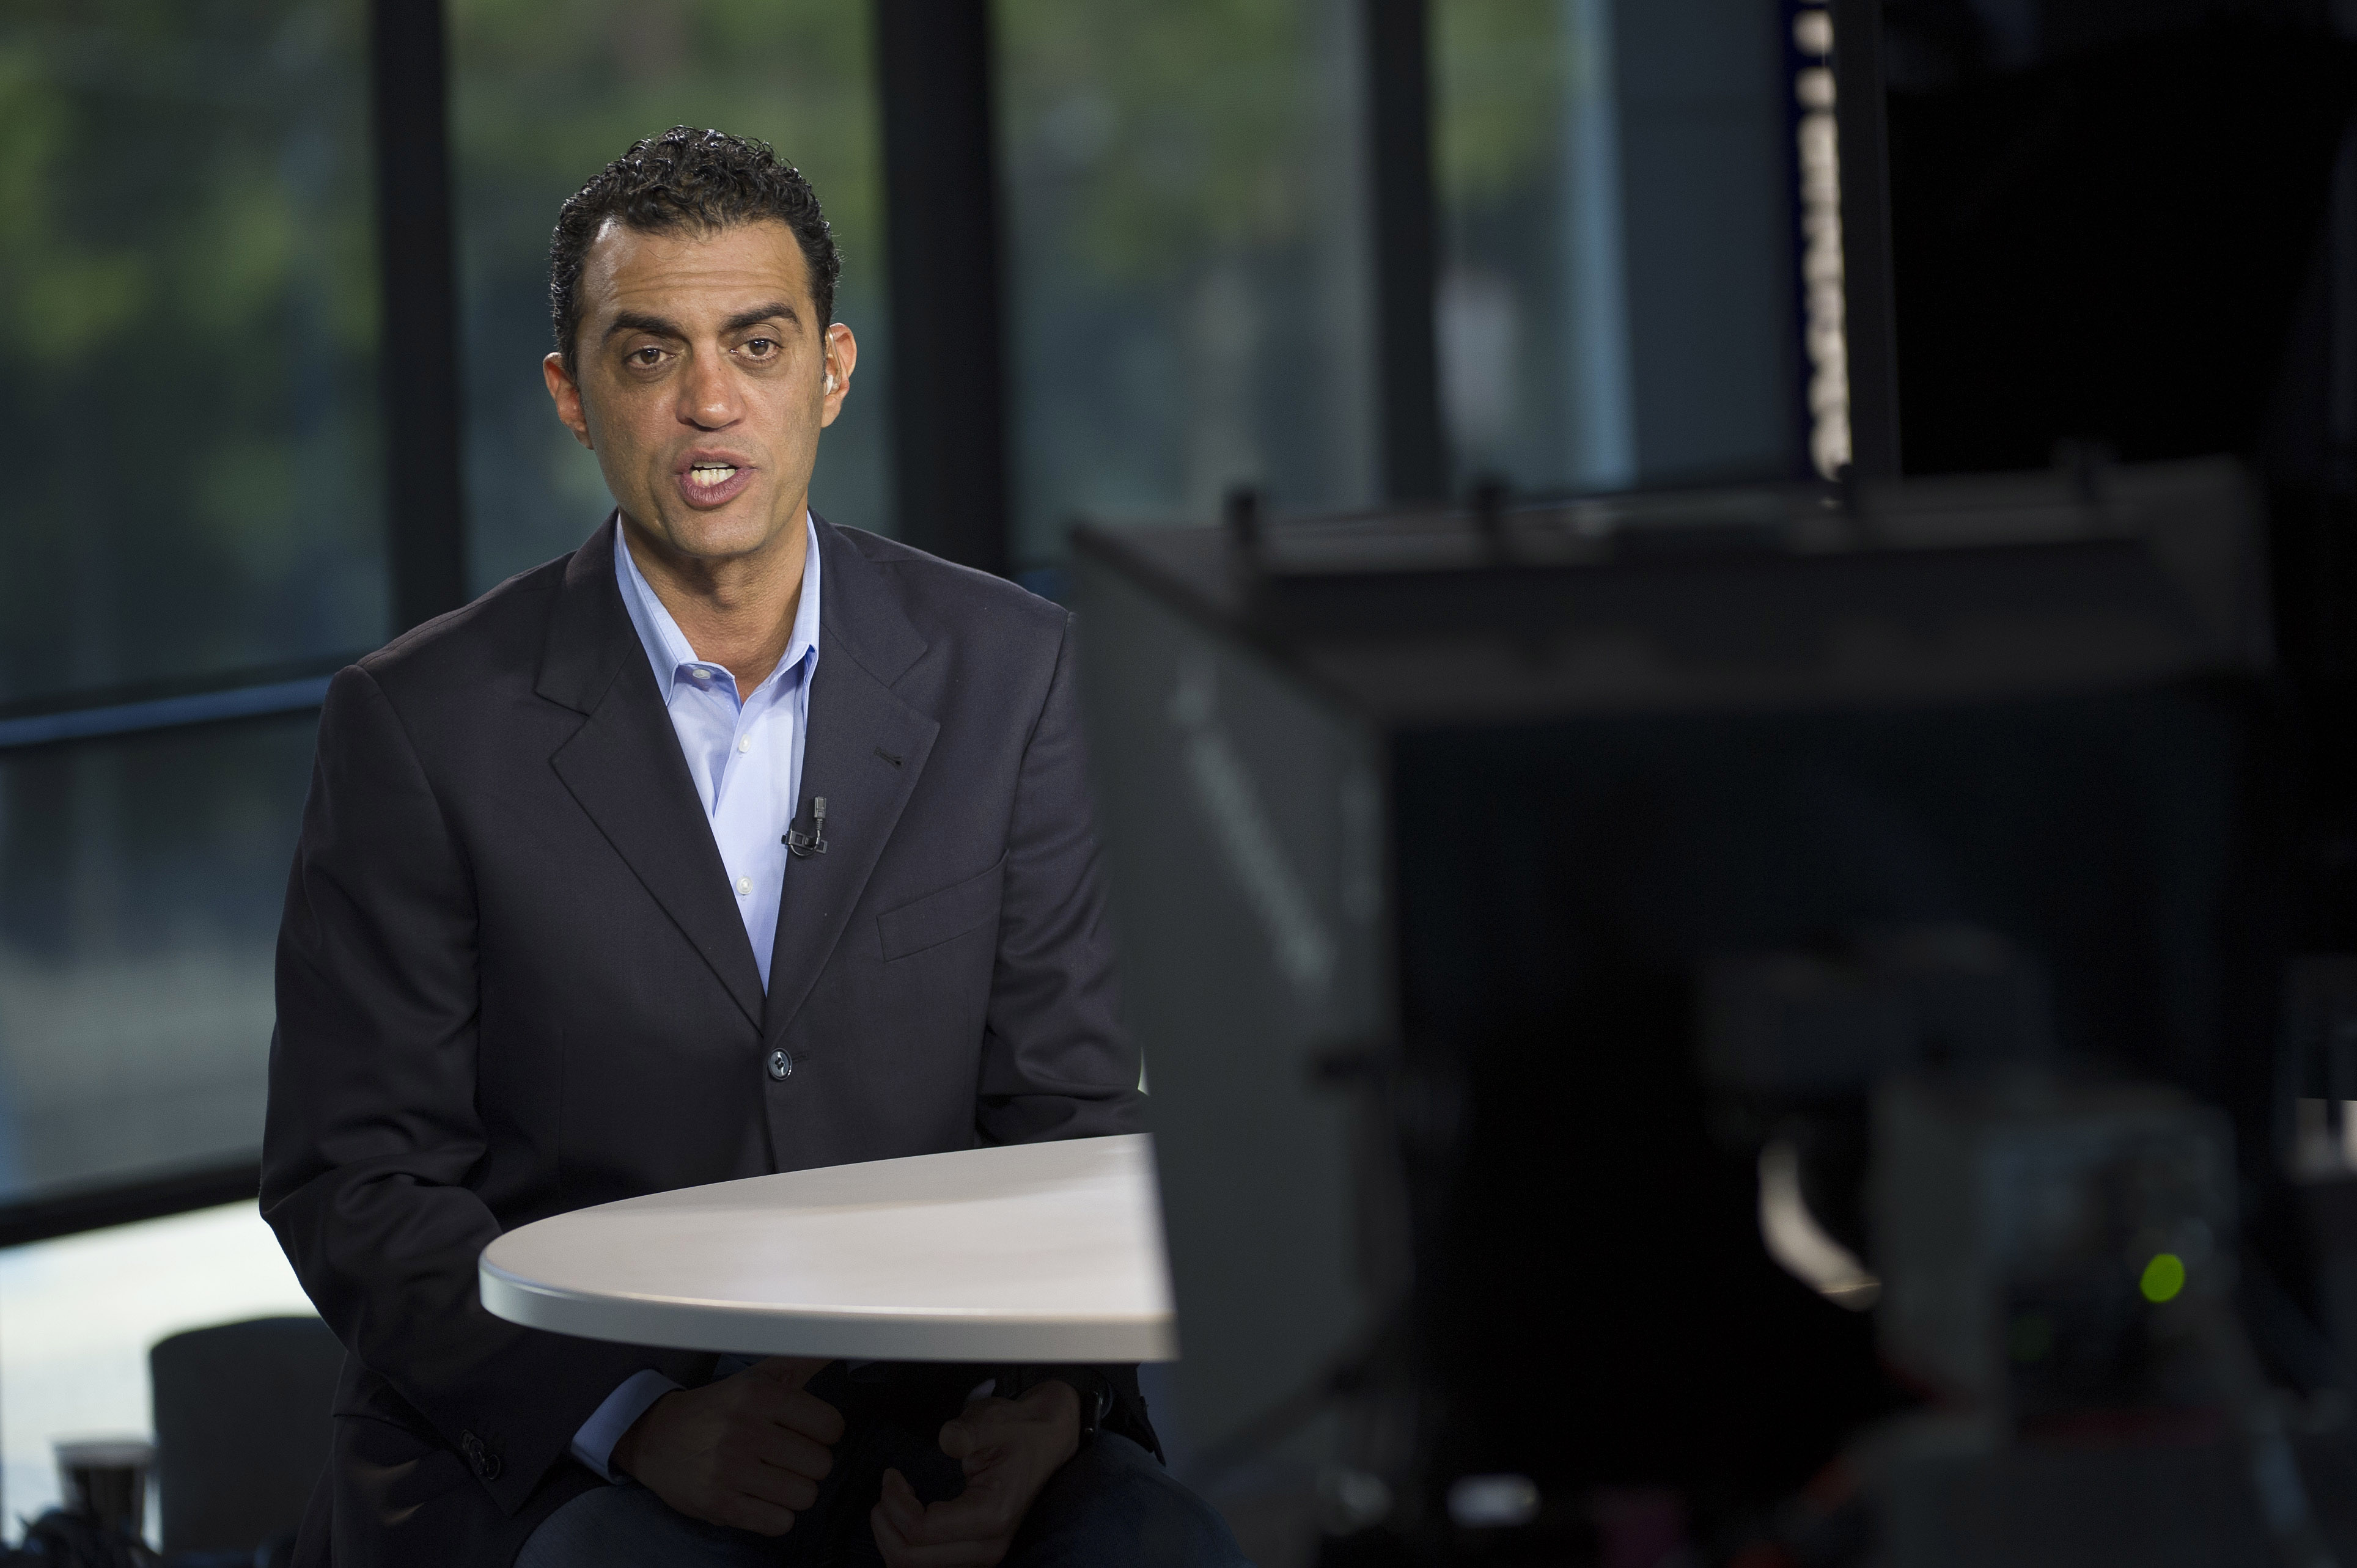 Emil Michael, senior vice president of business for Uber Technologies Inc., speaks during a Bloomberg Television interview in San Francisco, California, U.S., on Tuesday, July 29, 2014. (Bloomberg&mdash;Bloomberg via Getty Images)